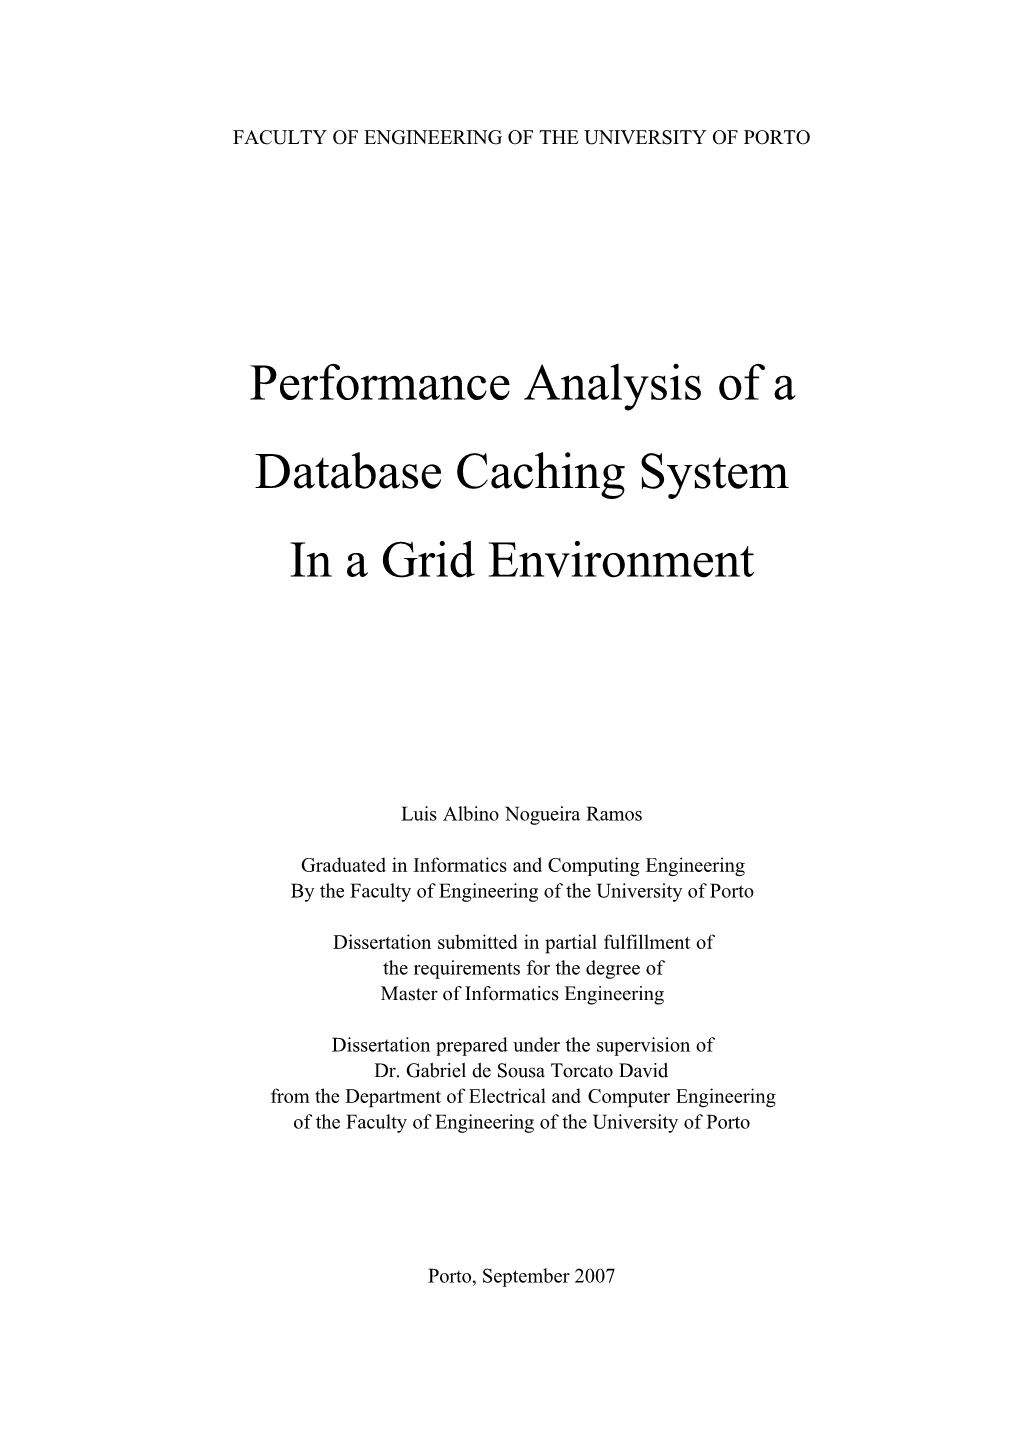 Performance Analysis of a Database Caching System in a Grid Environment